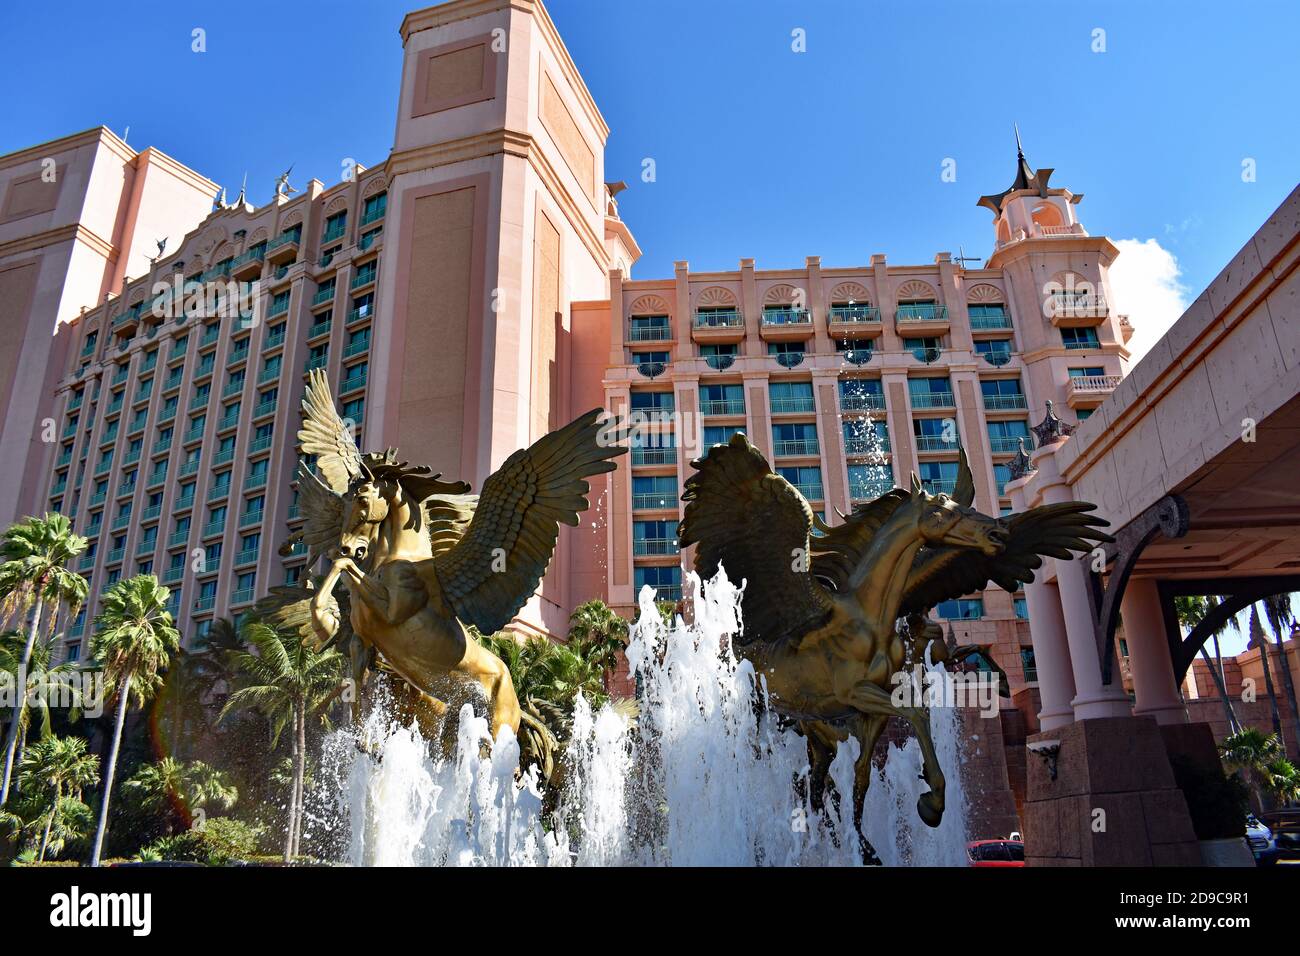 The main entrance to the Atlantis resort on Paradise Island, Bahamas. The Pegasus fountain with the Royal Tower, containing hotel rooms behind. Stock Photo